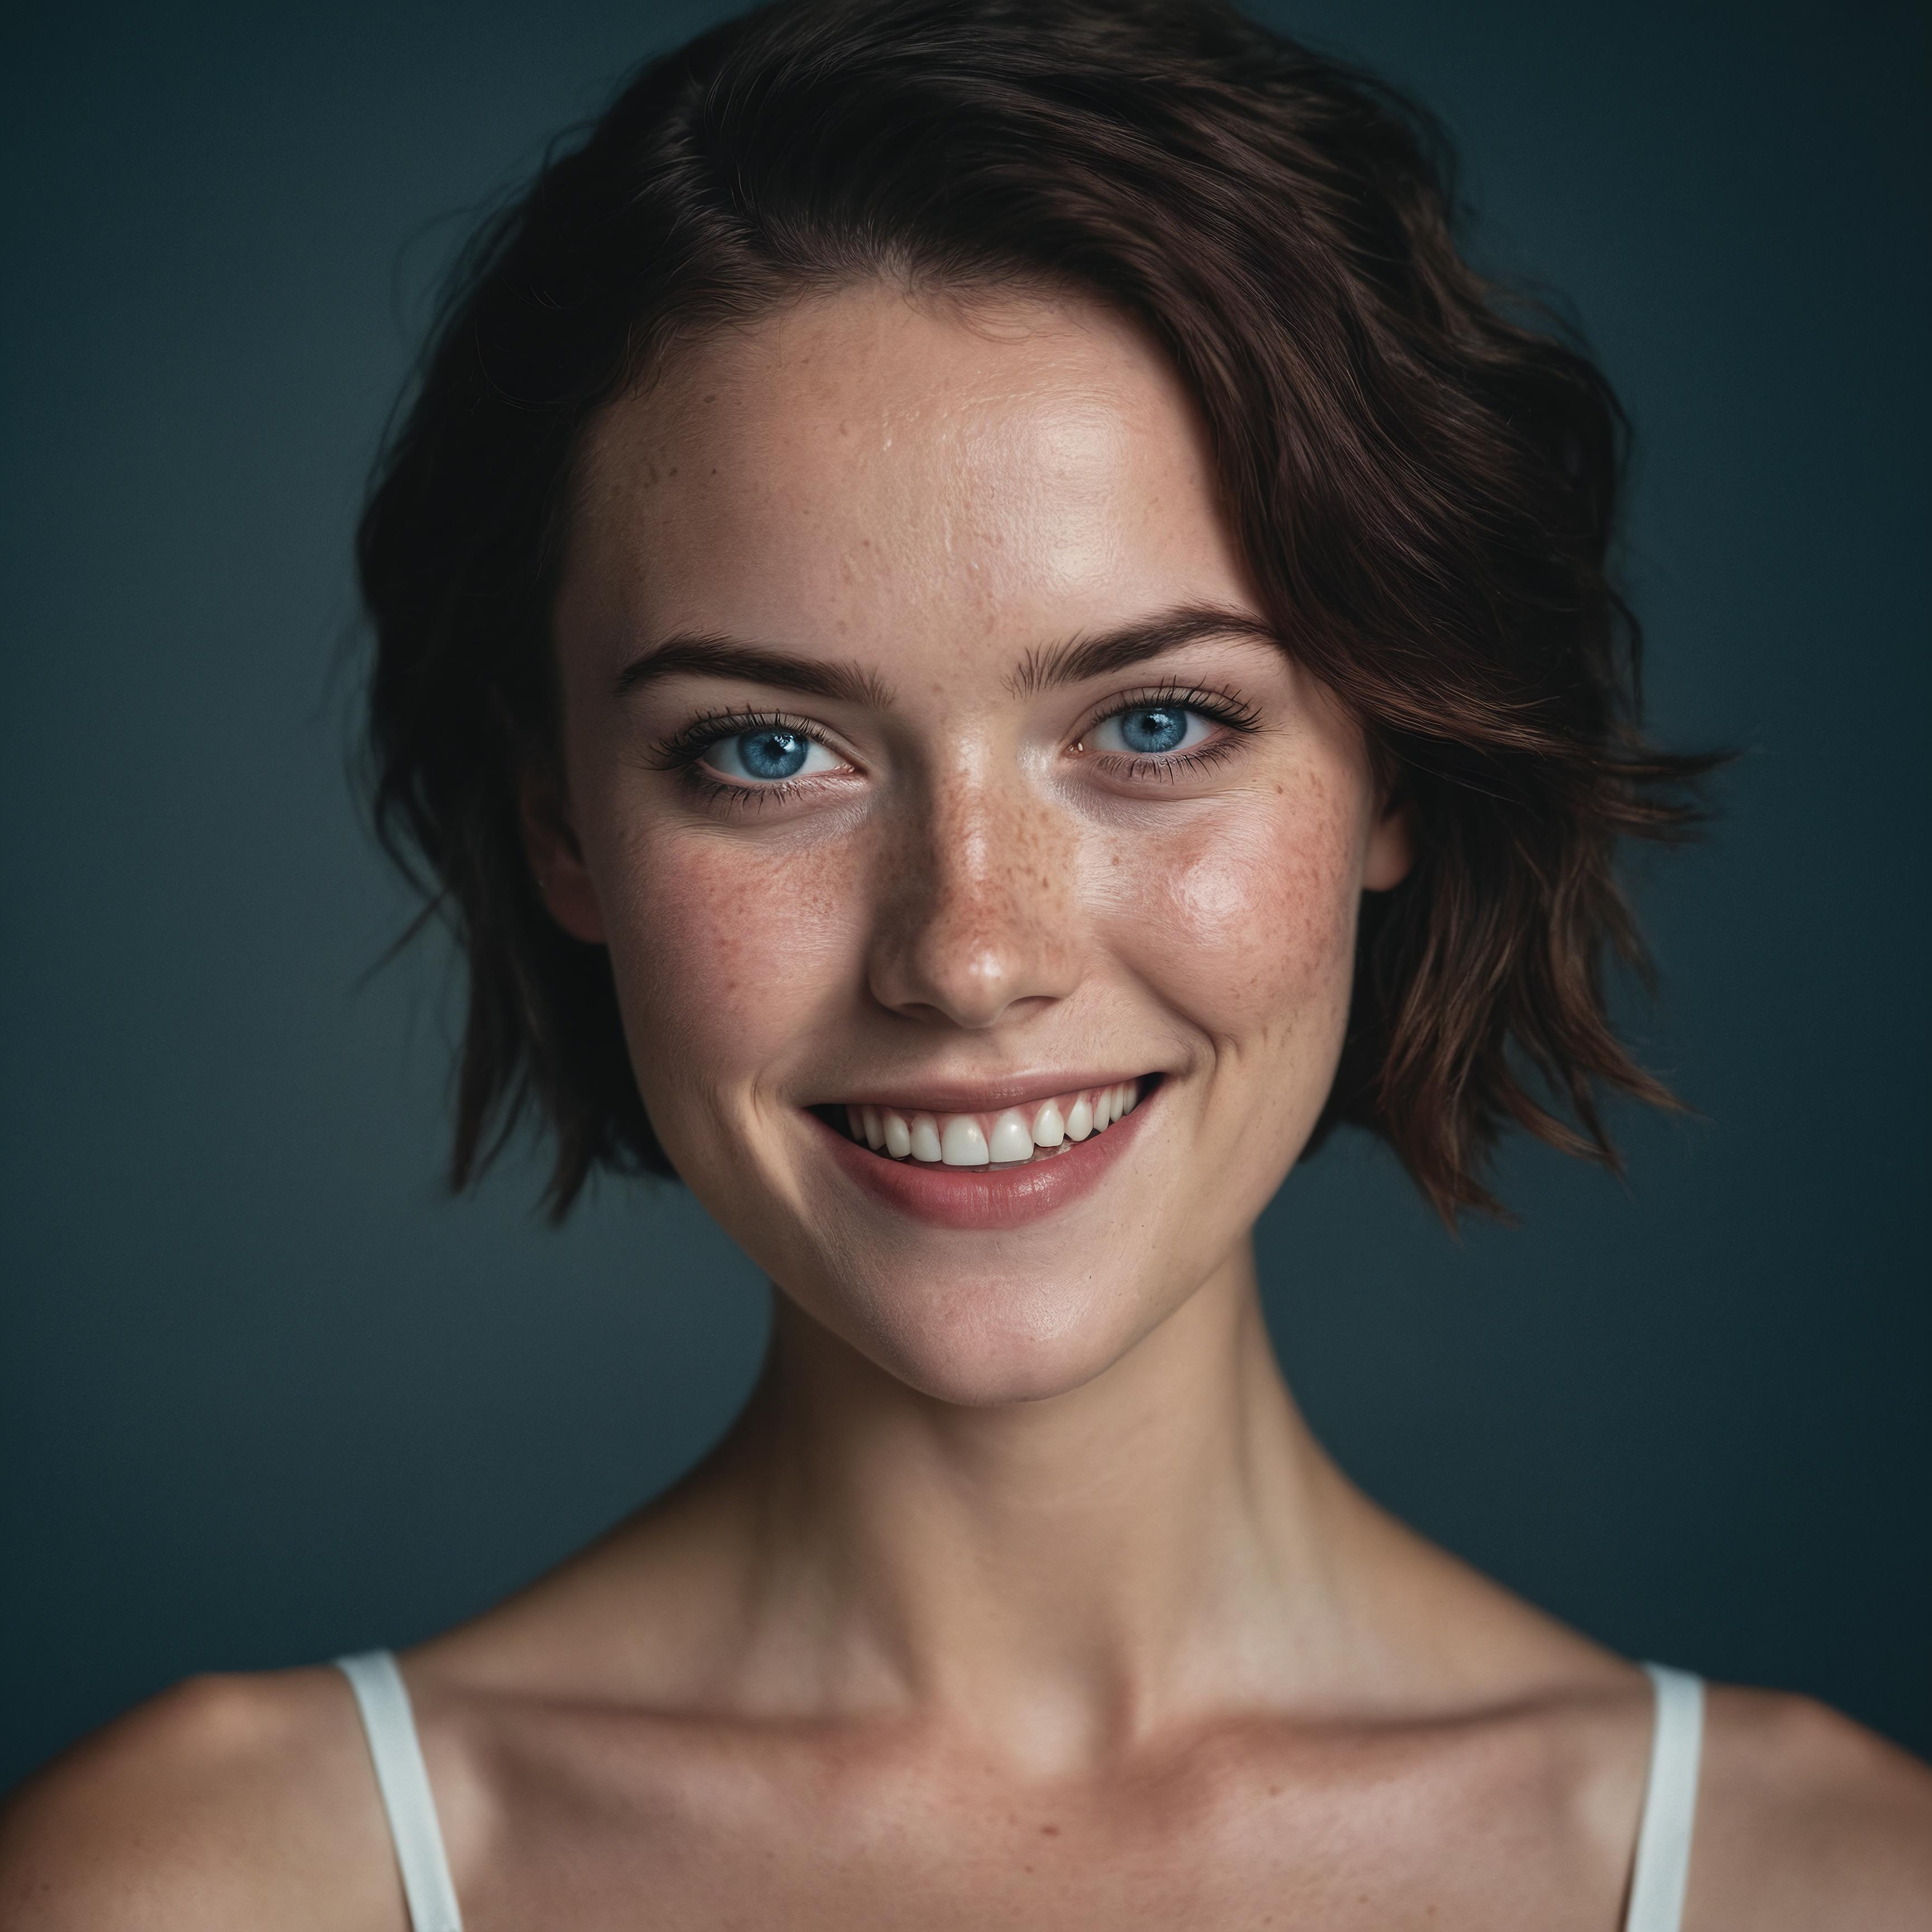 A young woman with a smile and blue eyes posing for a close-up picture.